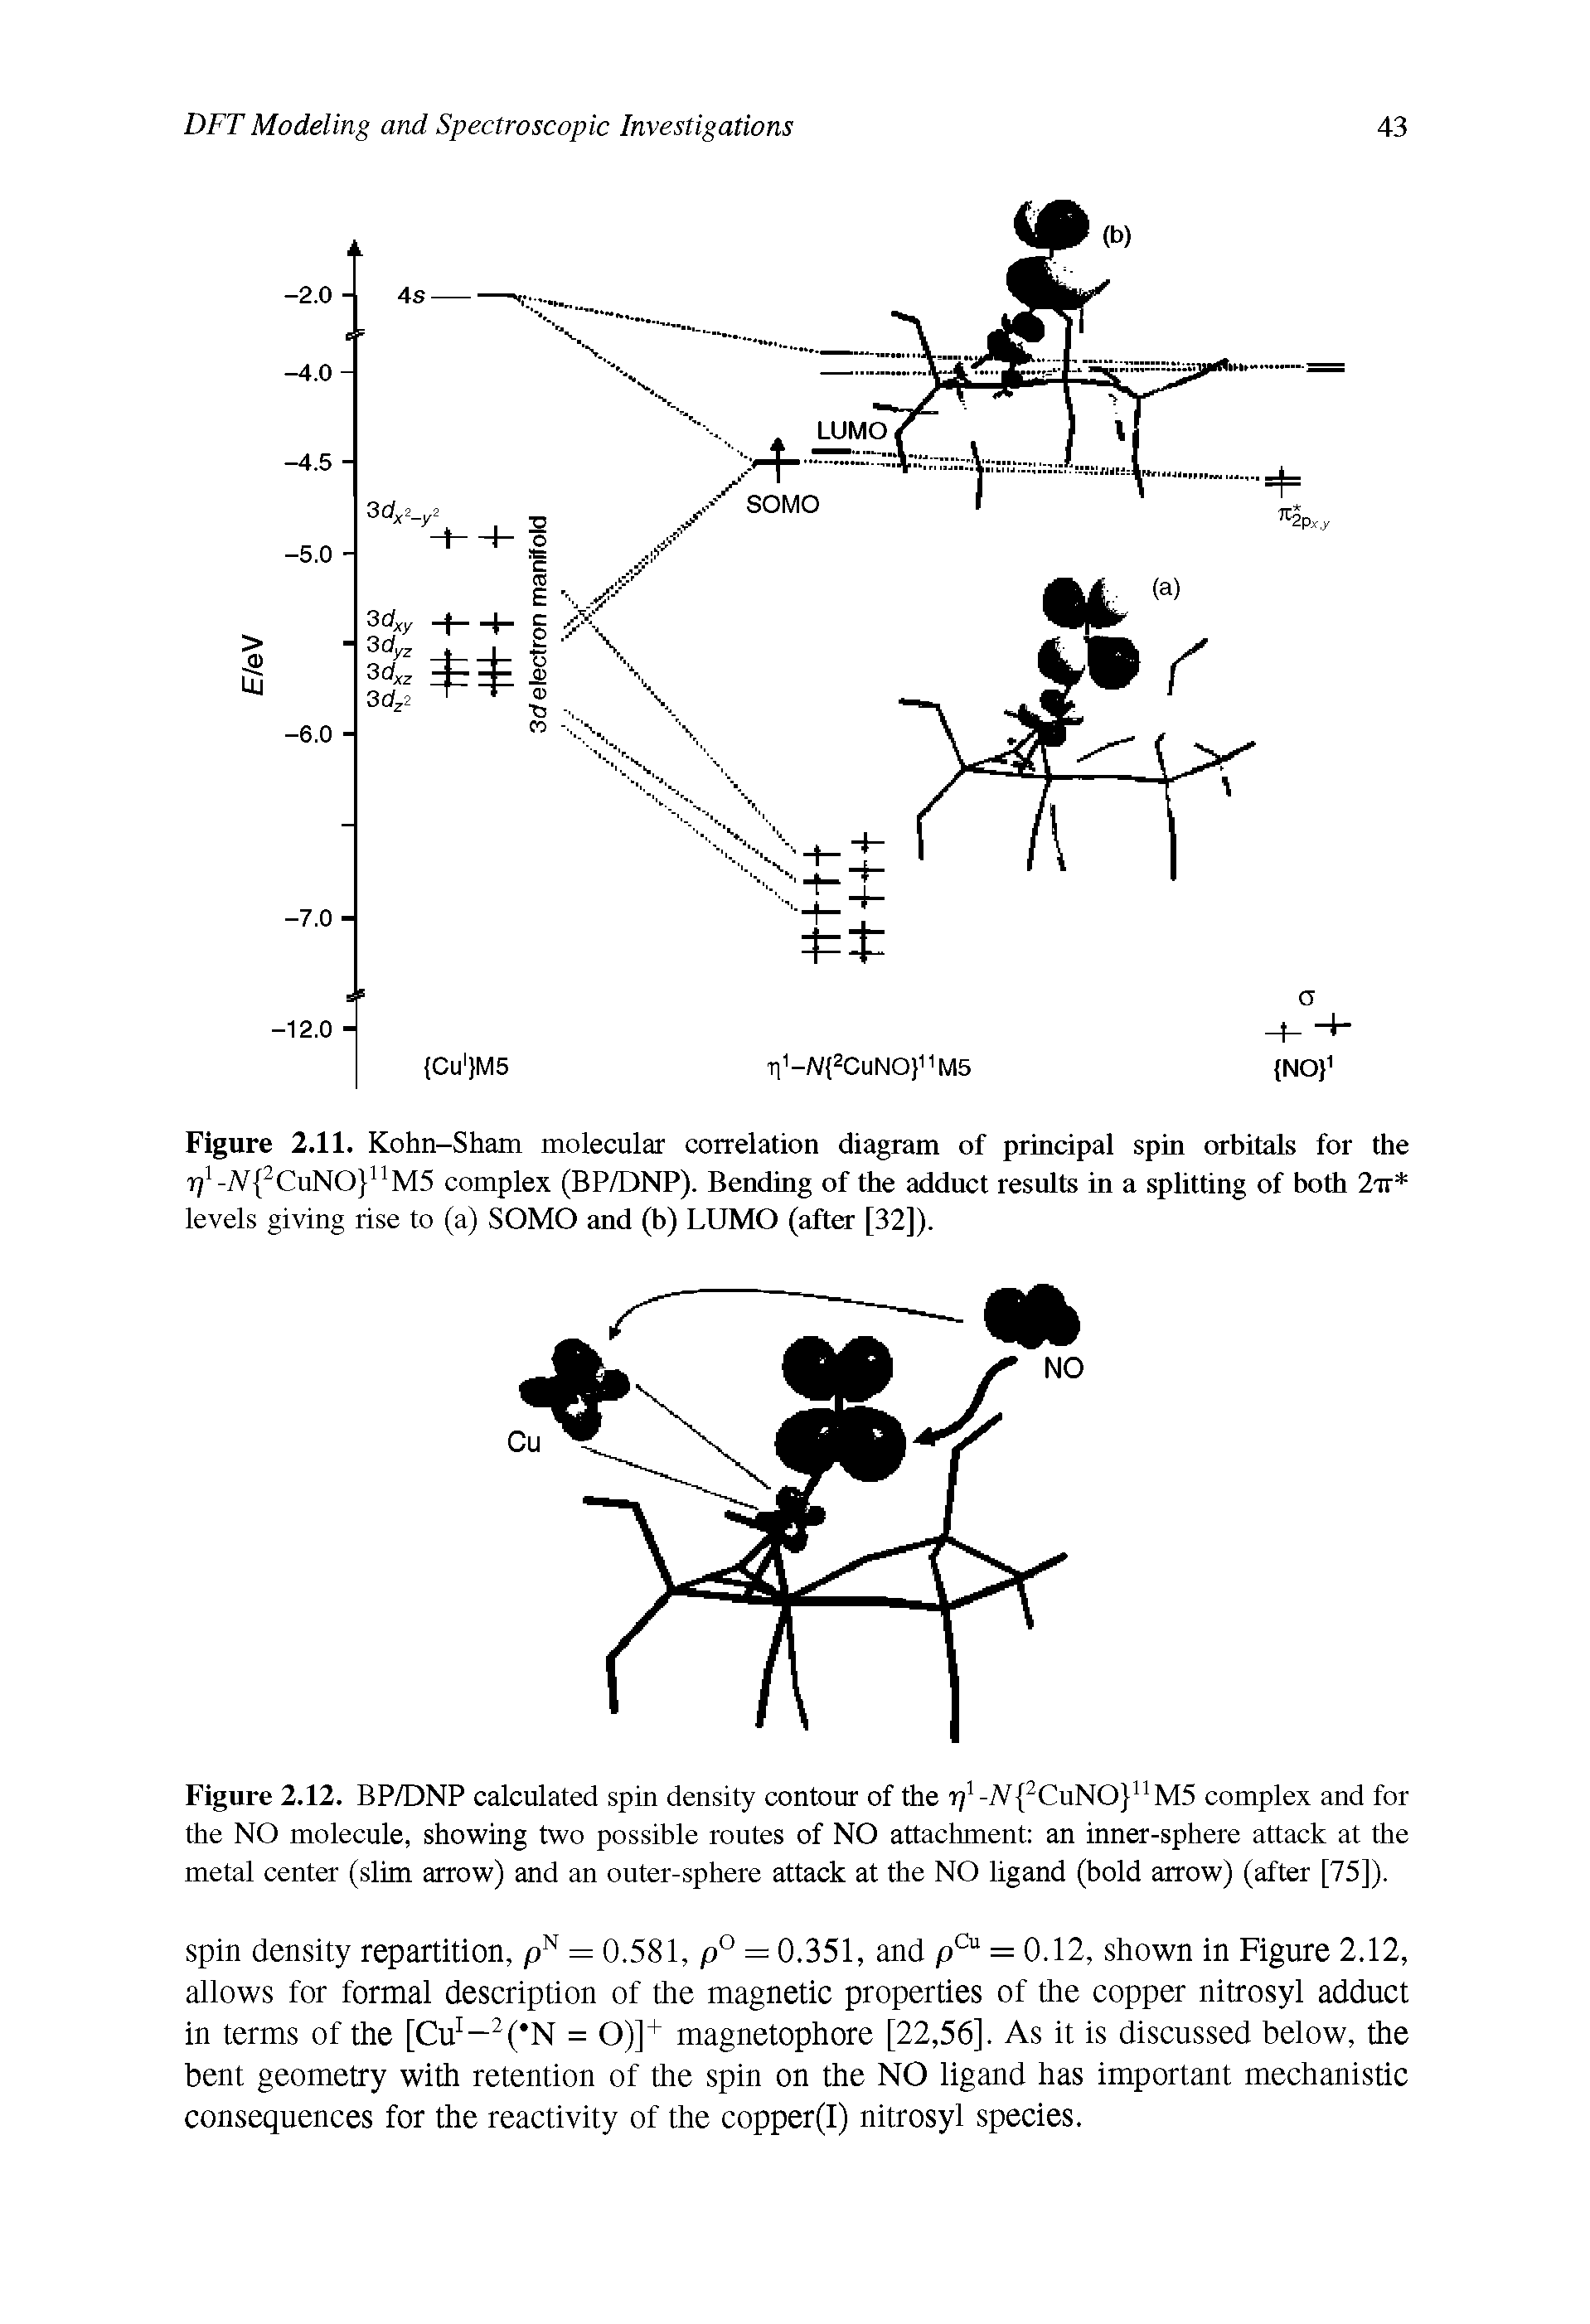 Figure 2.12. BP/DNP calculated spin density contour of the r/-/V 2CuNO nM5 complex and for the NO molecule, showing two possible routes of NO attachment an inner-sphere attack at the metal center (slim arrow) and an outer-sphere attack at the NO ligand (bold arrow) (after [75]).